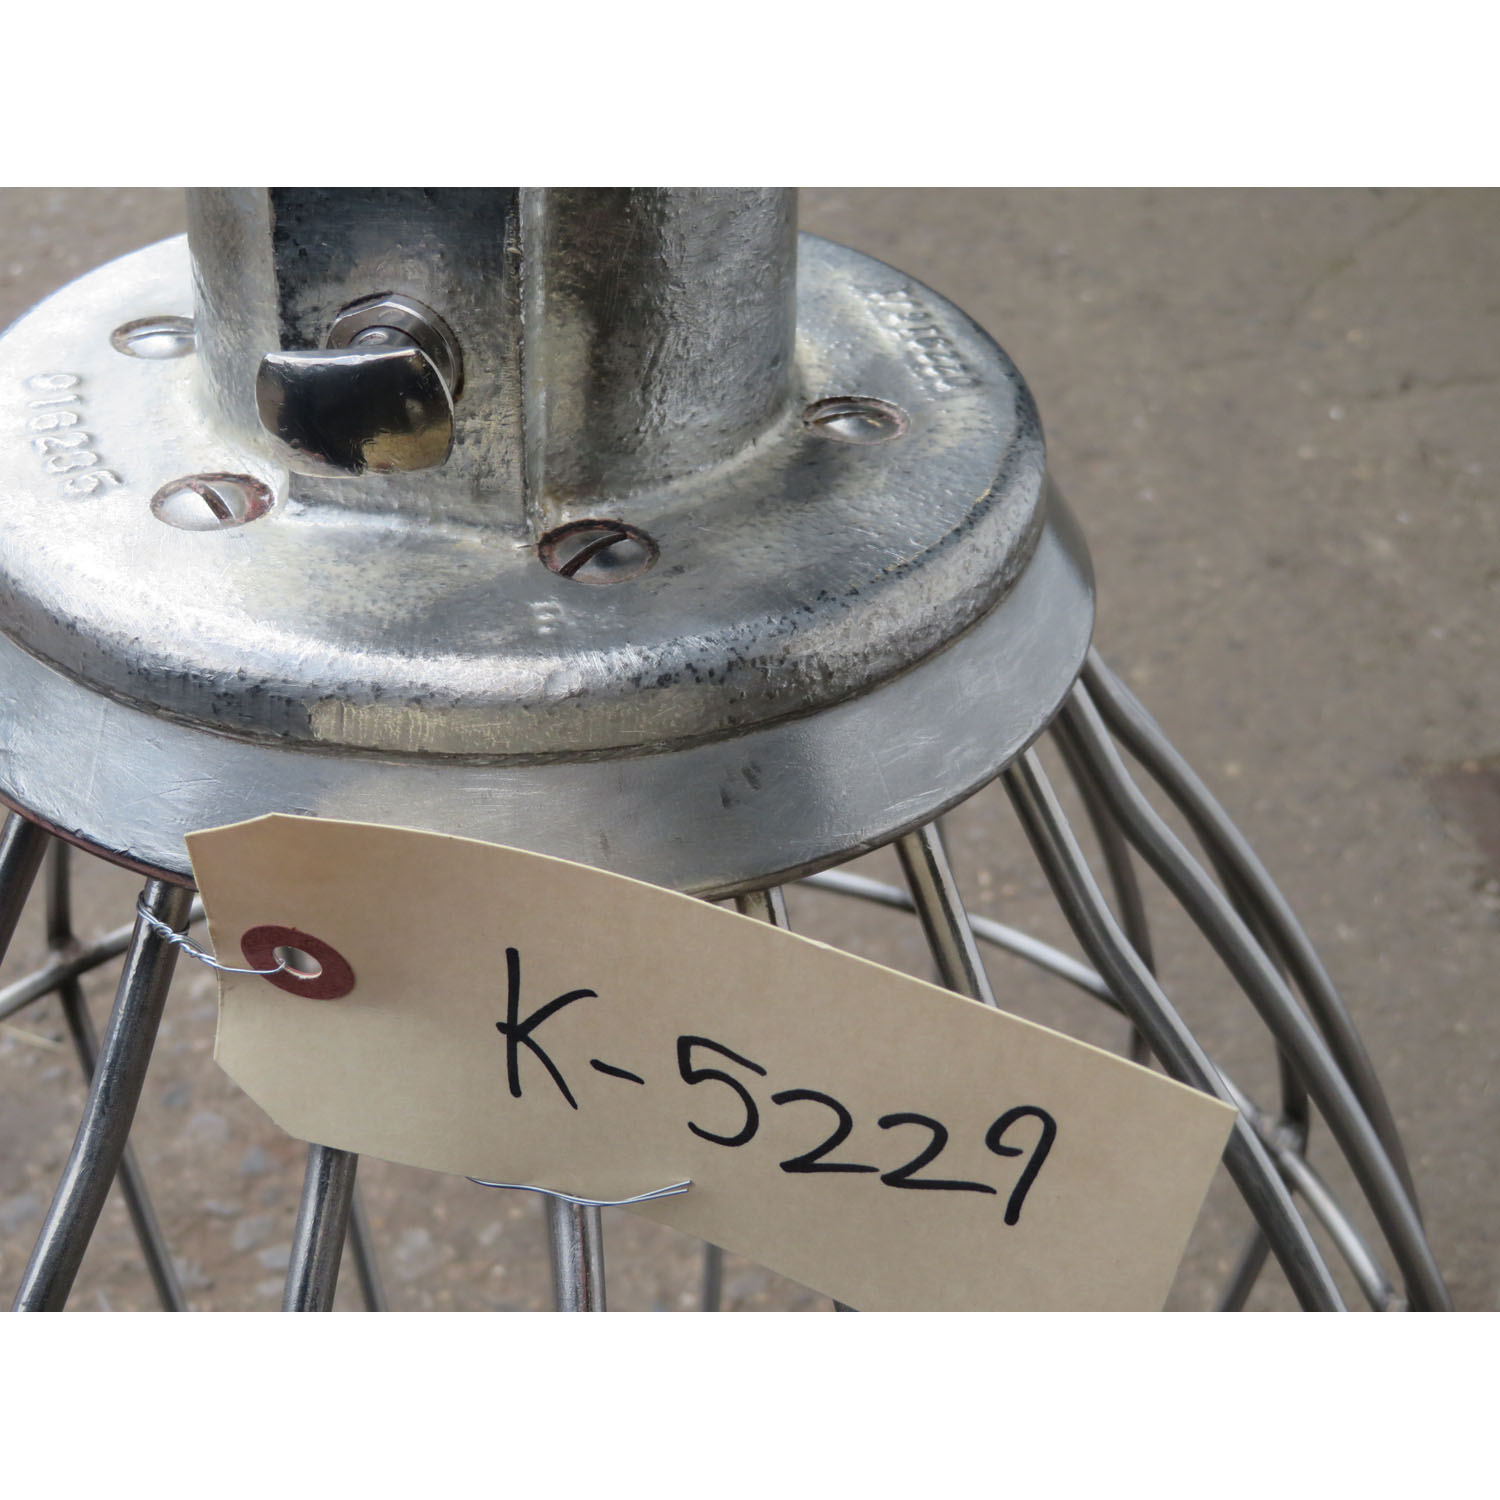 Hobart 00-295144 Heavy Duty Stainless Steel I-Whip For V1401 Mixers, Used Great Condition image 2